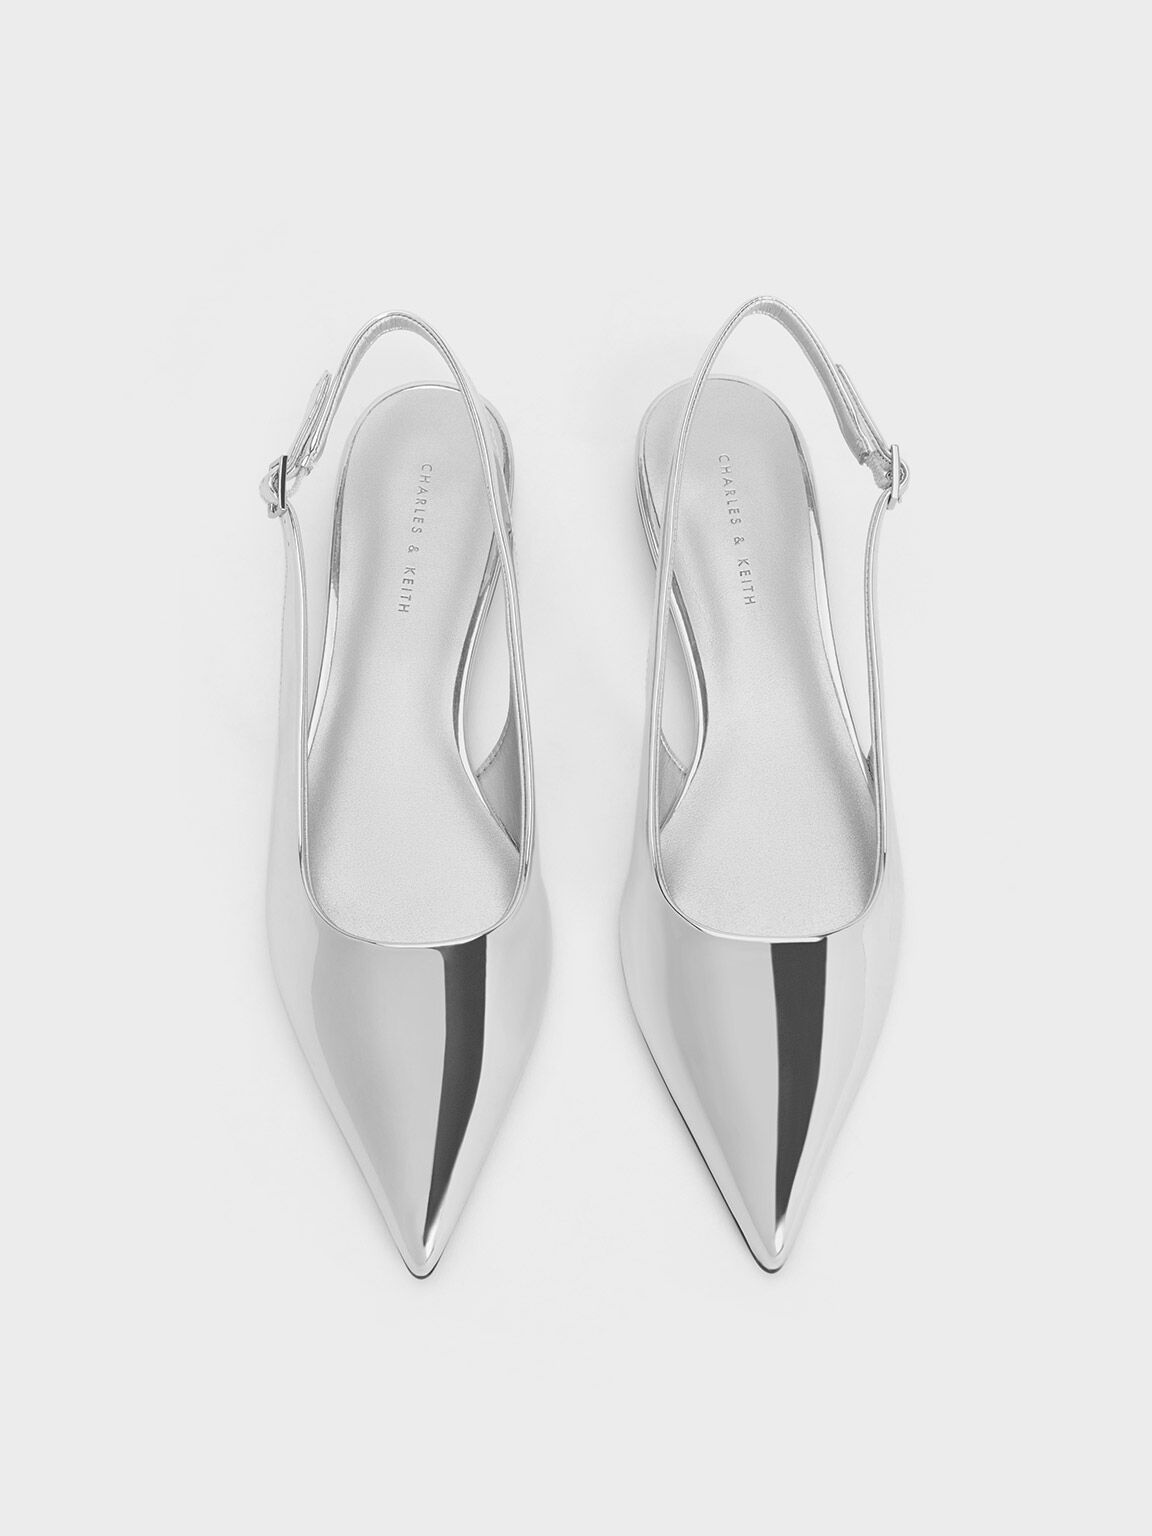 Silver Metallic Pointed-Toe Slingback Flats - CHARLES & KEITH US